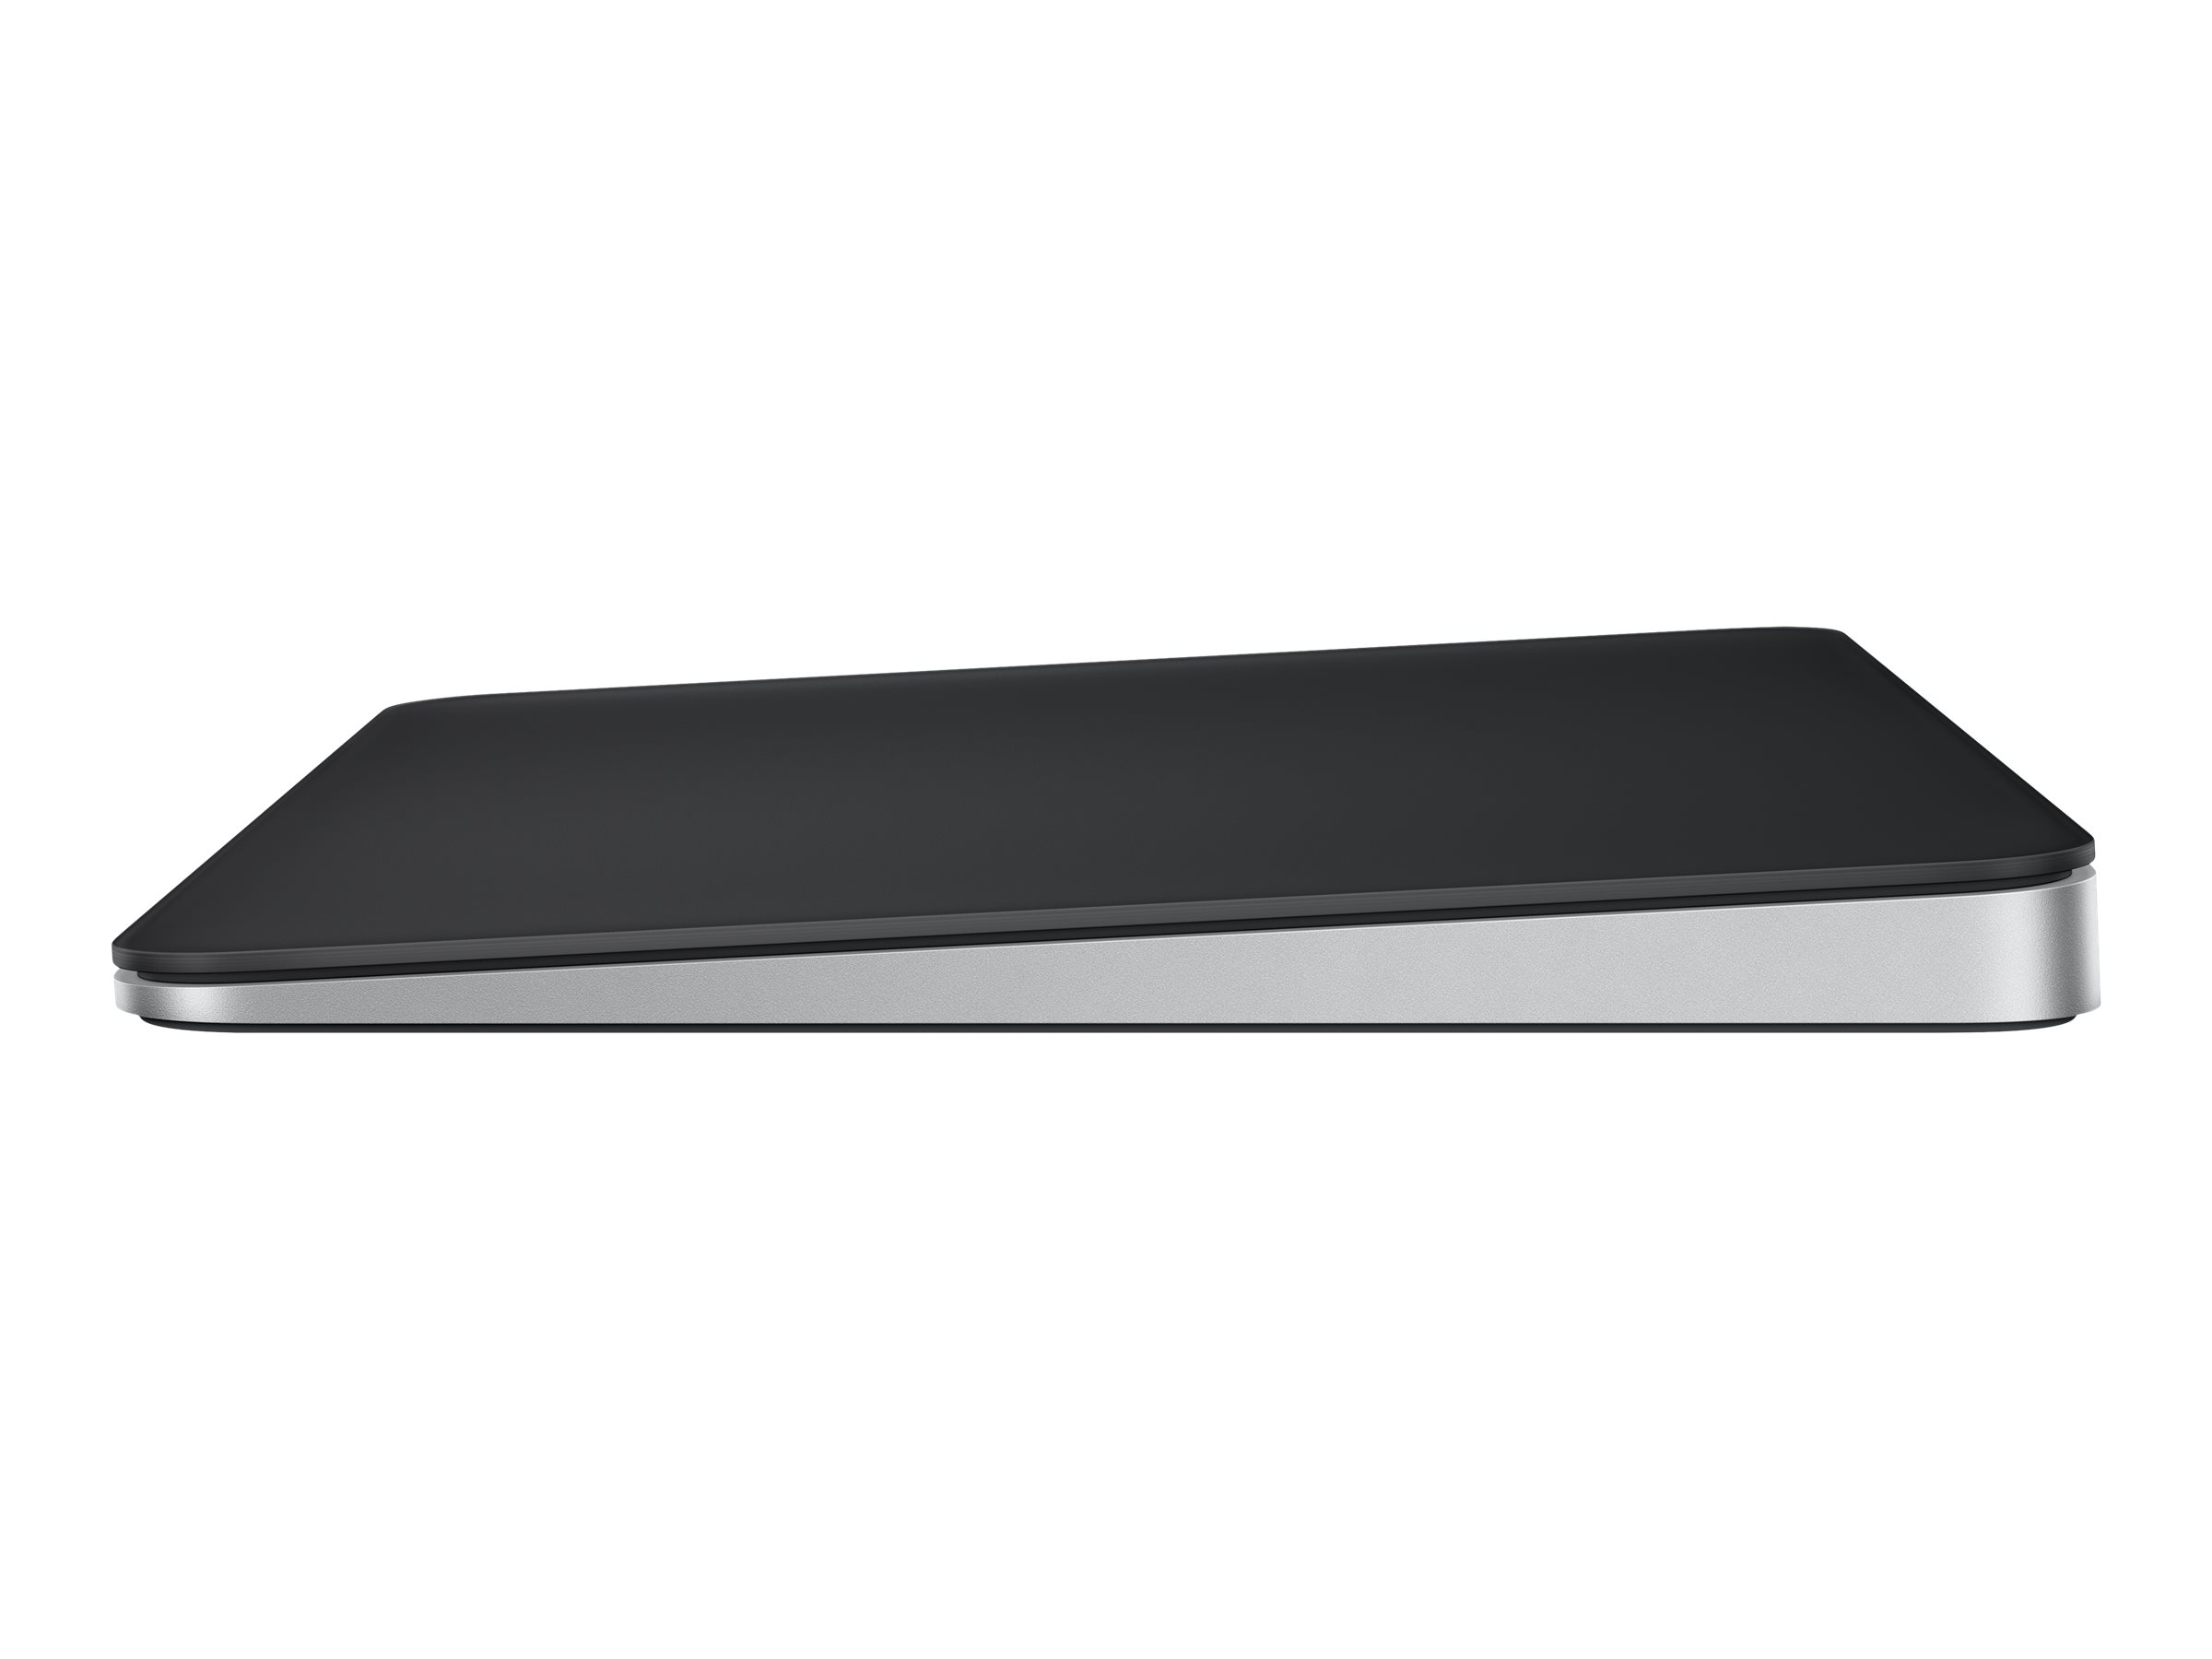 Magic Trackpad black multi touch surface